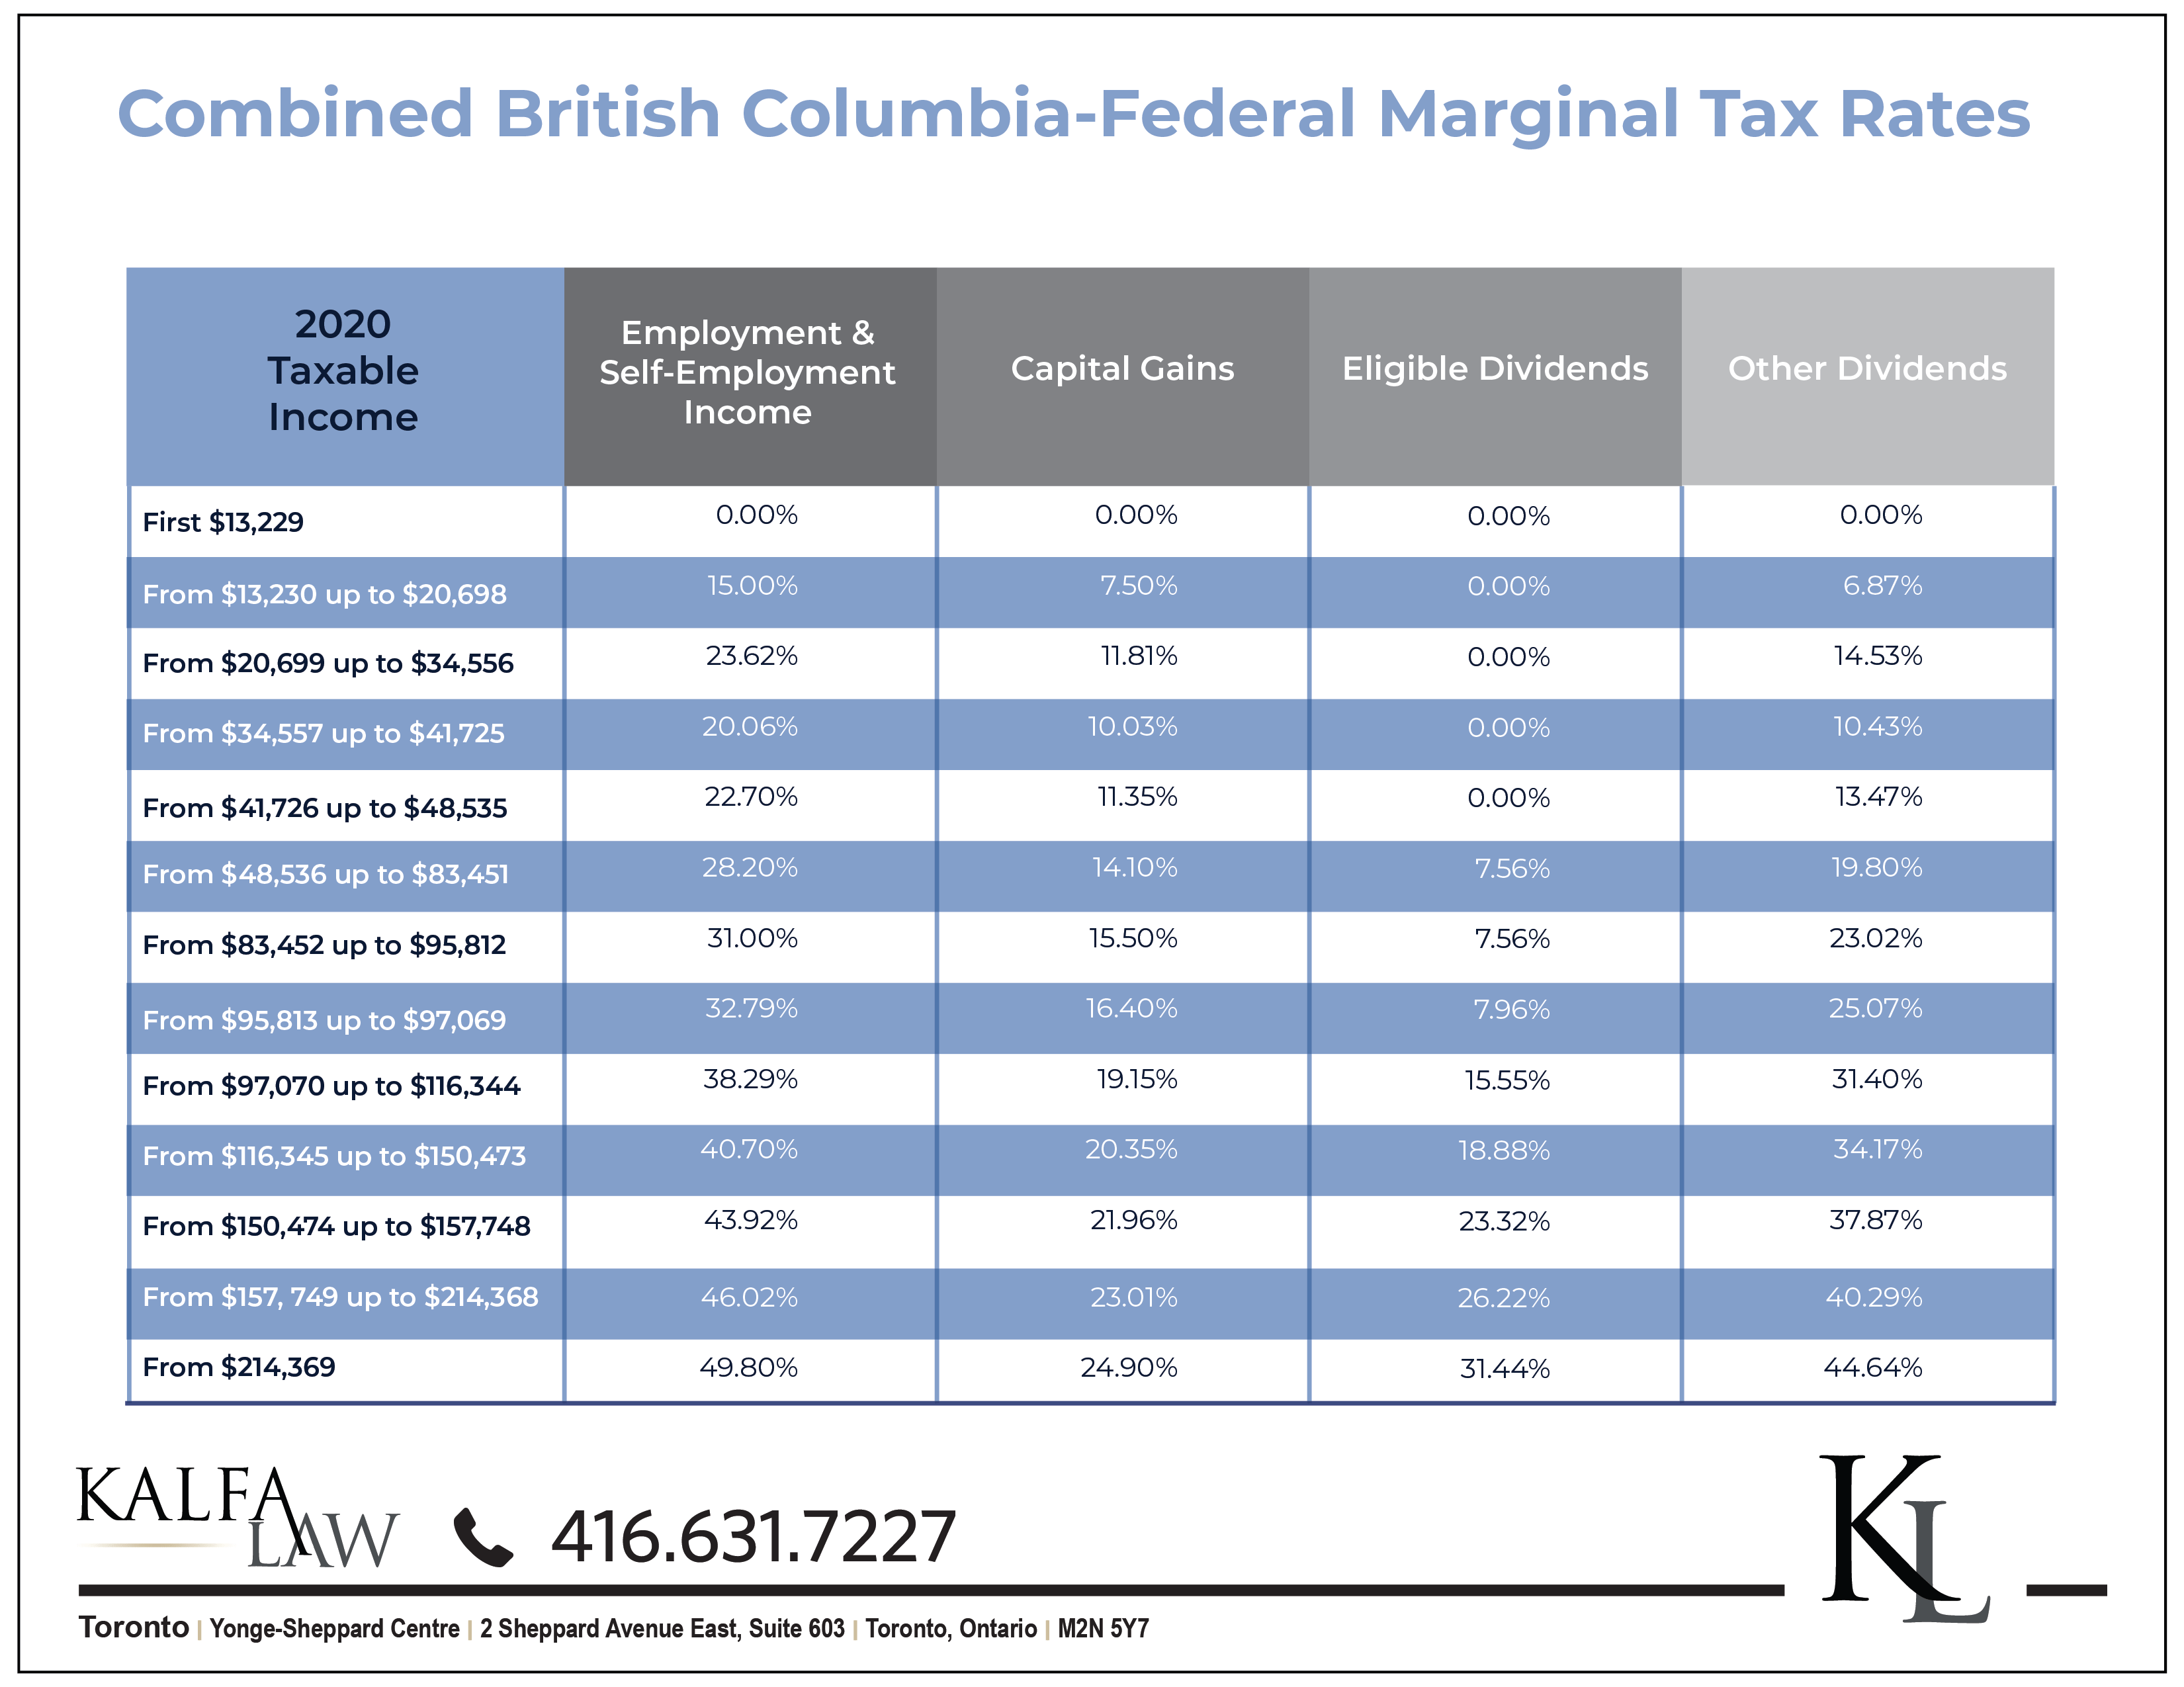 complete-guide-to-canadian-marginal-tax-rates-in-2020-kalfa-law